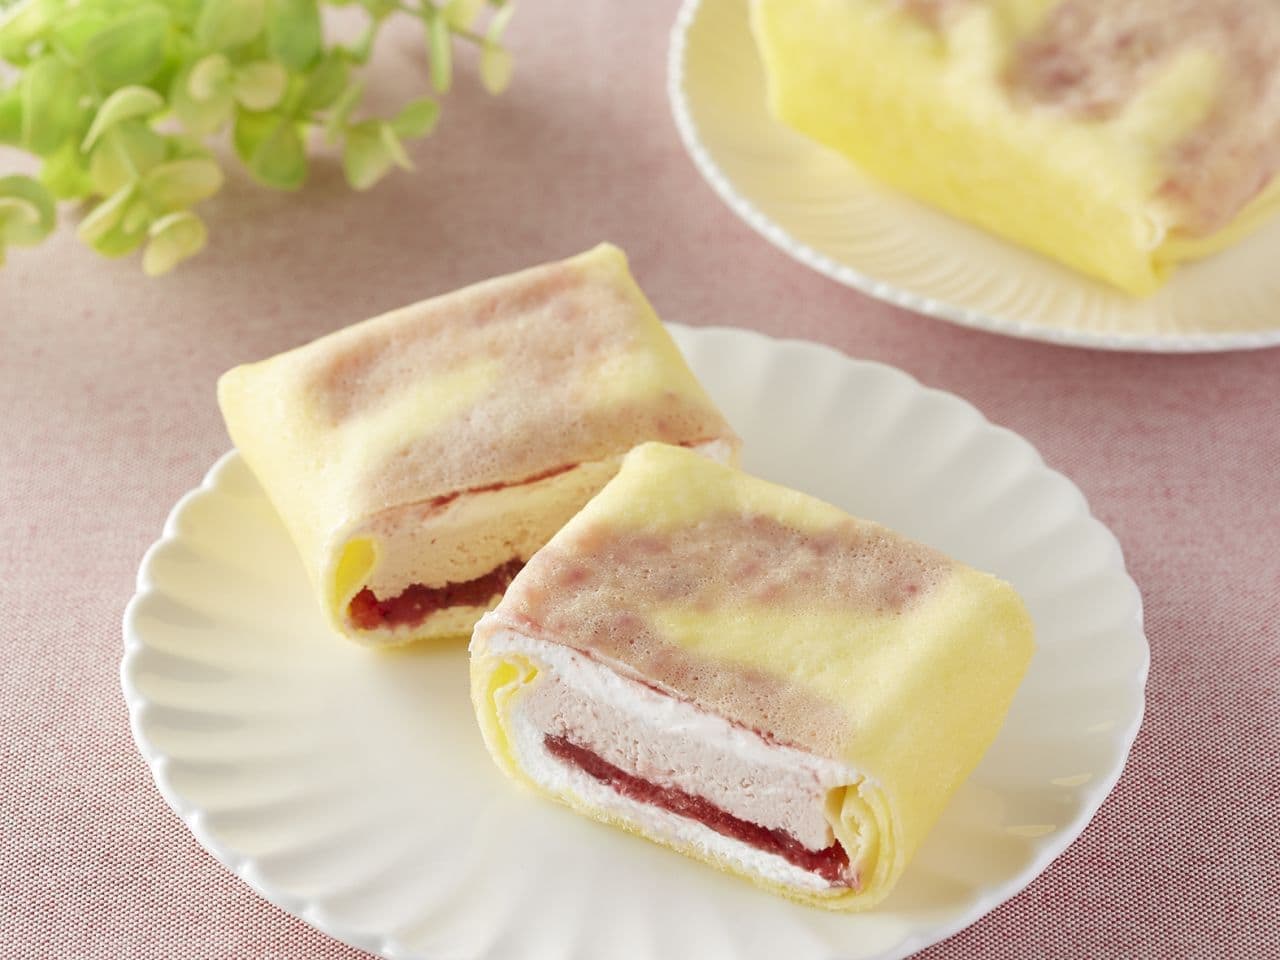 Ministop "Happiness Crepe - Strawberry & Rare Cheese